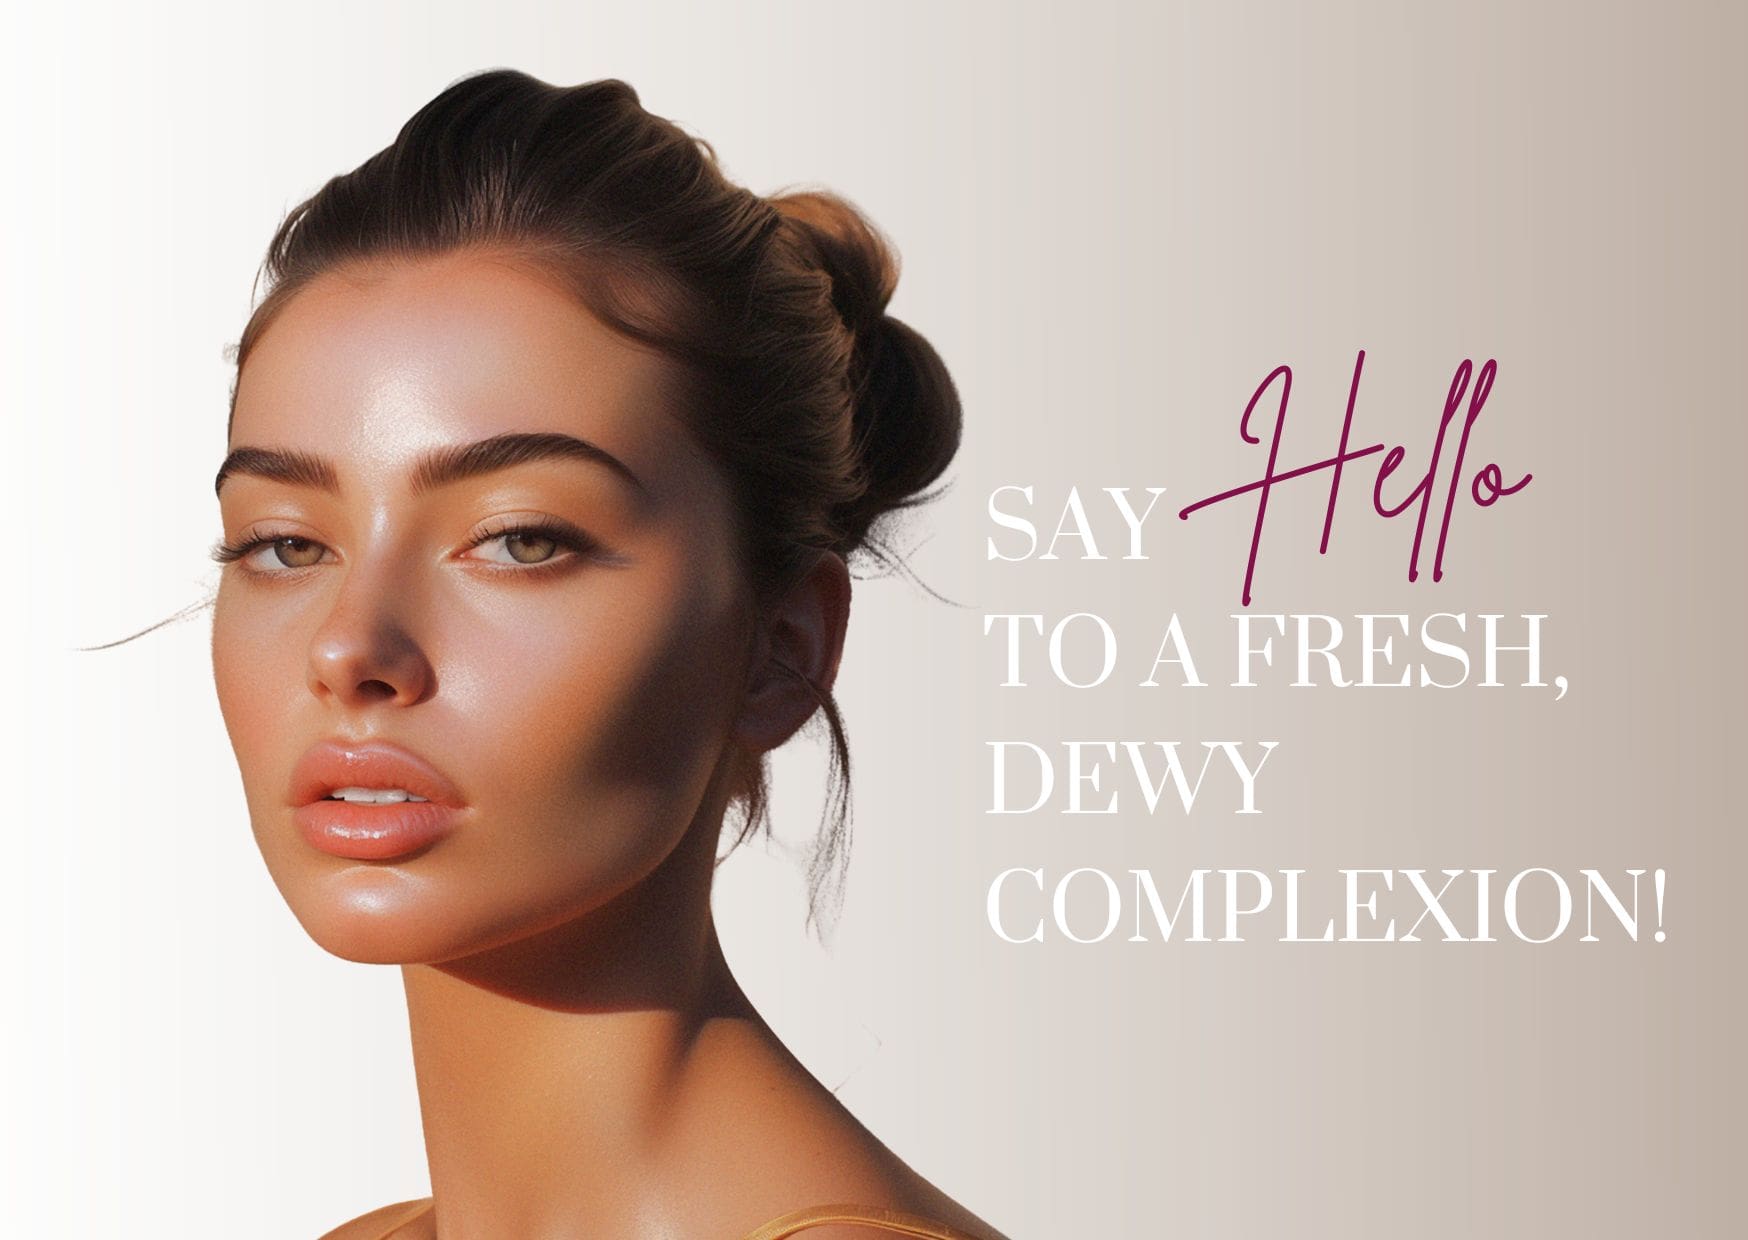 Face of a young woman with dewy skin with the words say hello to a fresh, dewy complextion